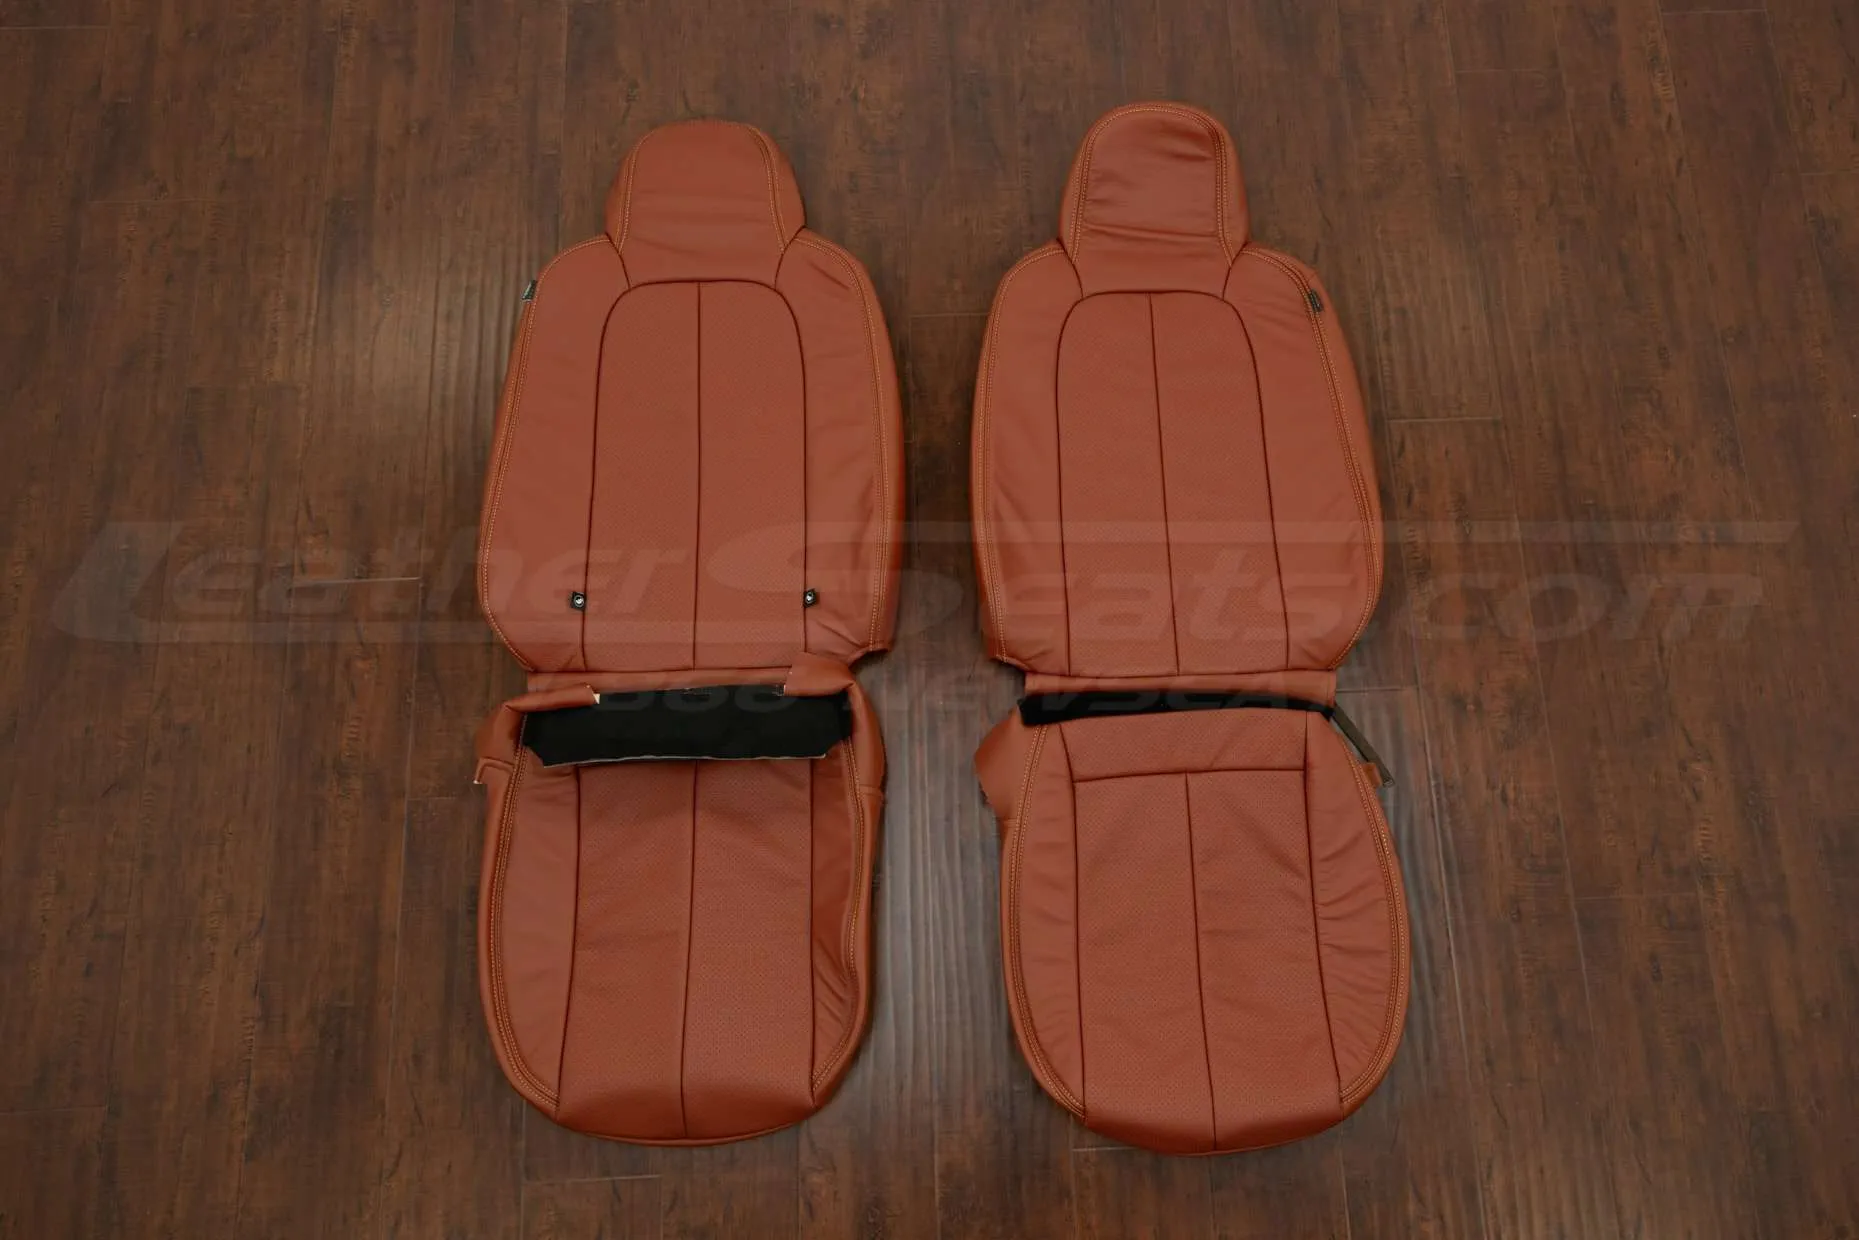 Mazda Miata leather seat upholstery kit - Mitt Brown w/ Perforated Inserts - Front seat upholstery